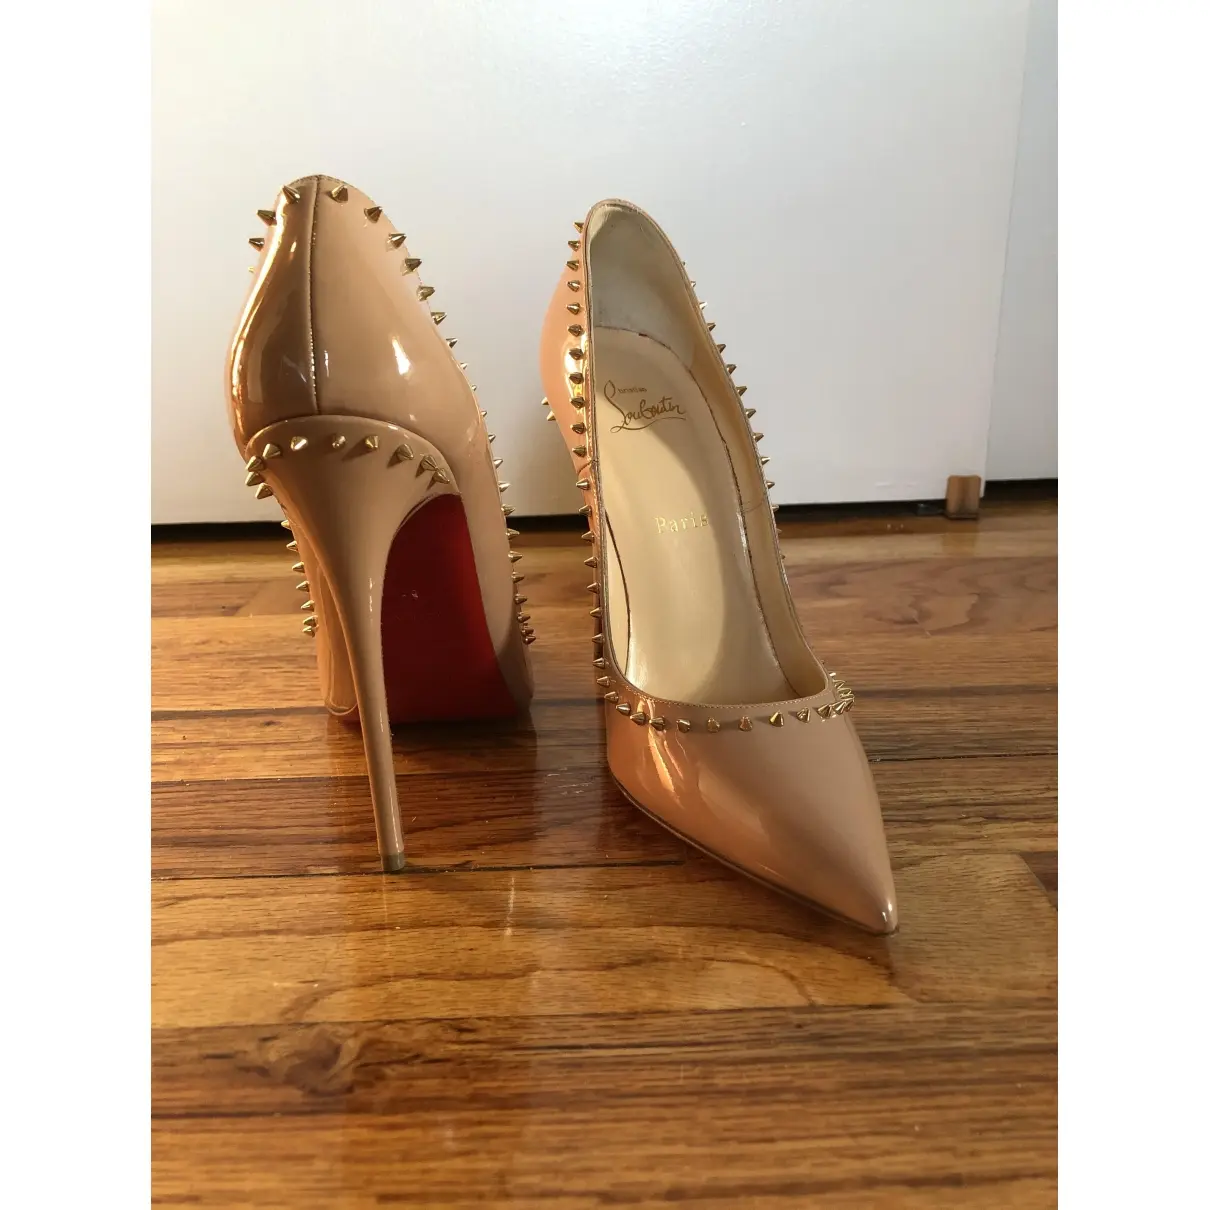 Christian Louboutin Anjalina patent leather heels for sale